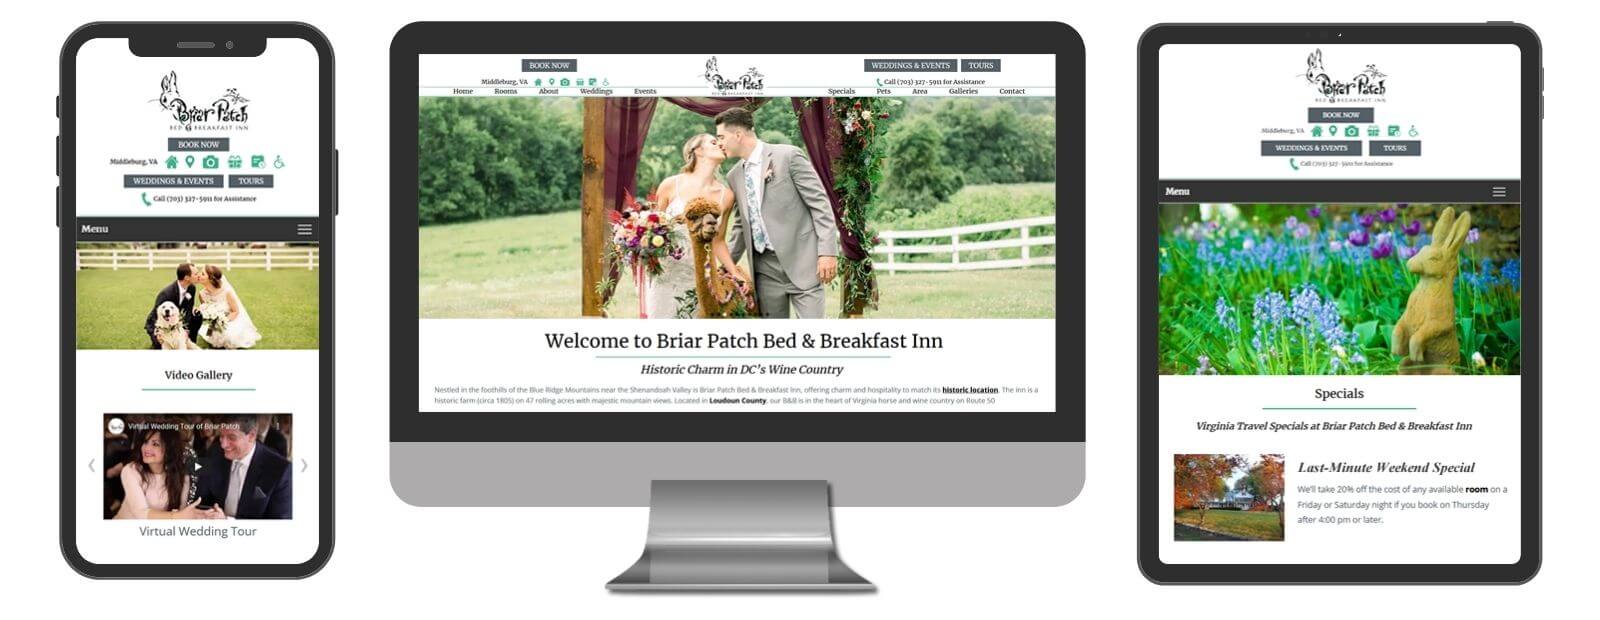 Briar Patch Bed & Breakfast Inn shown in Tablet, Desktop and Mobile versions